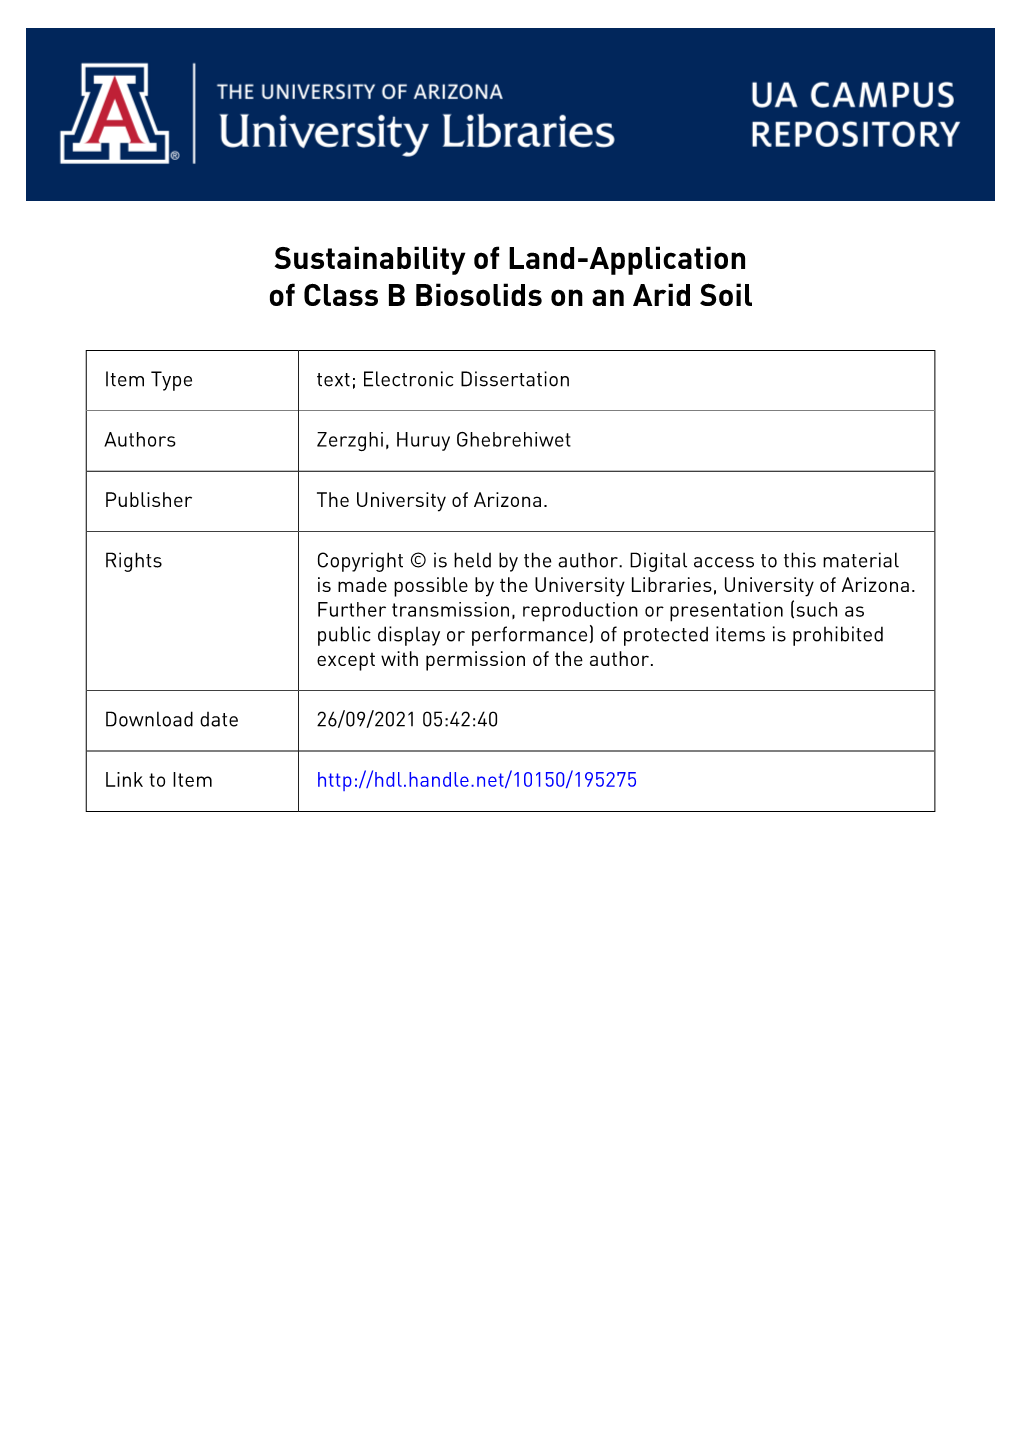 Sustainability of Land-Application of Class B Biosolids on an Arid Soil